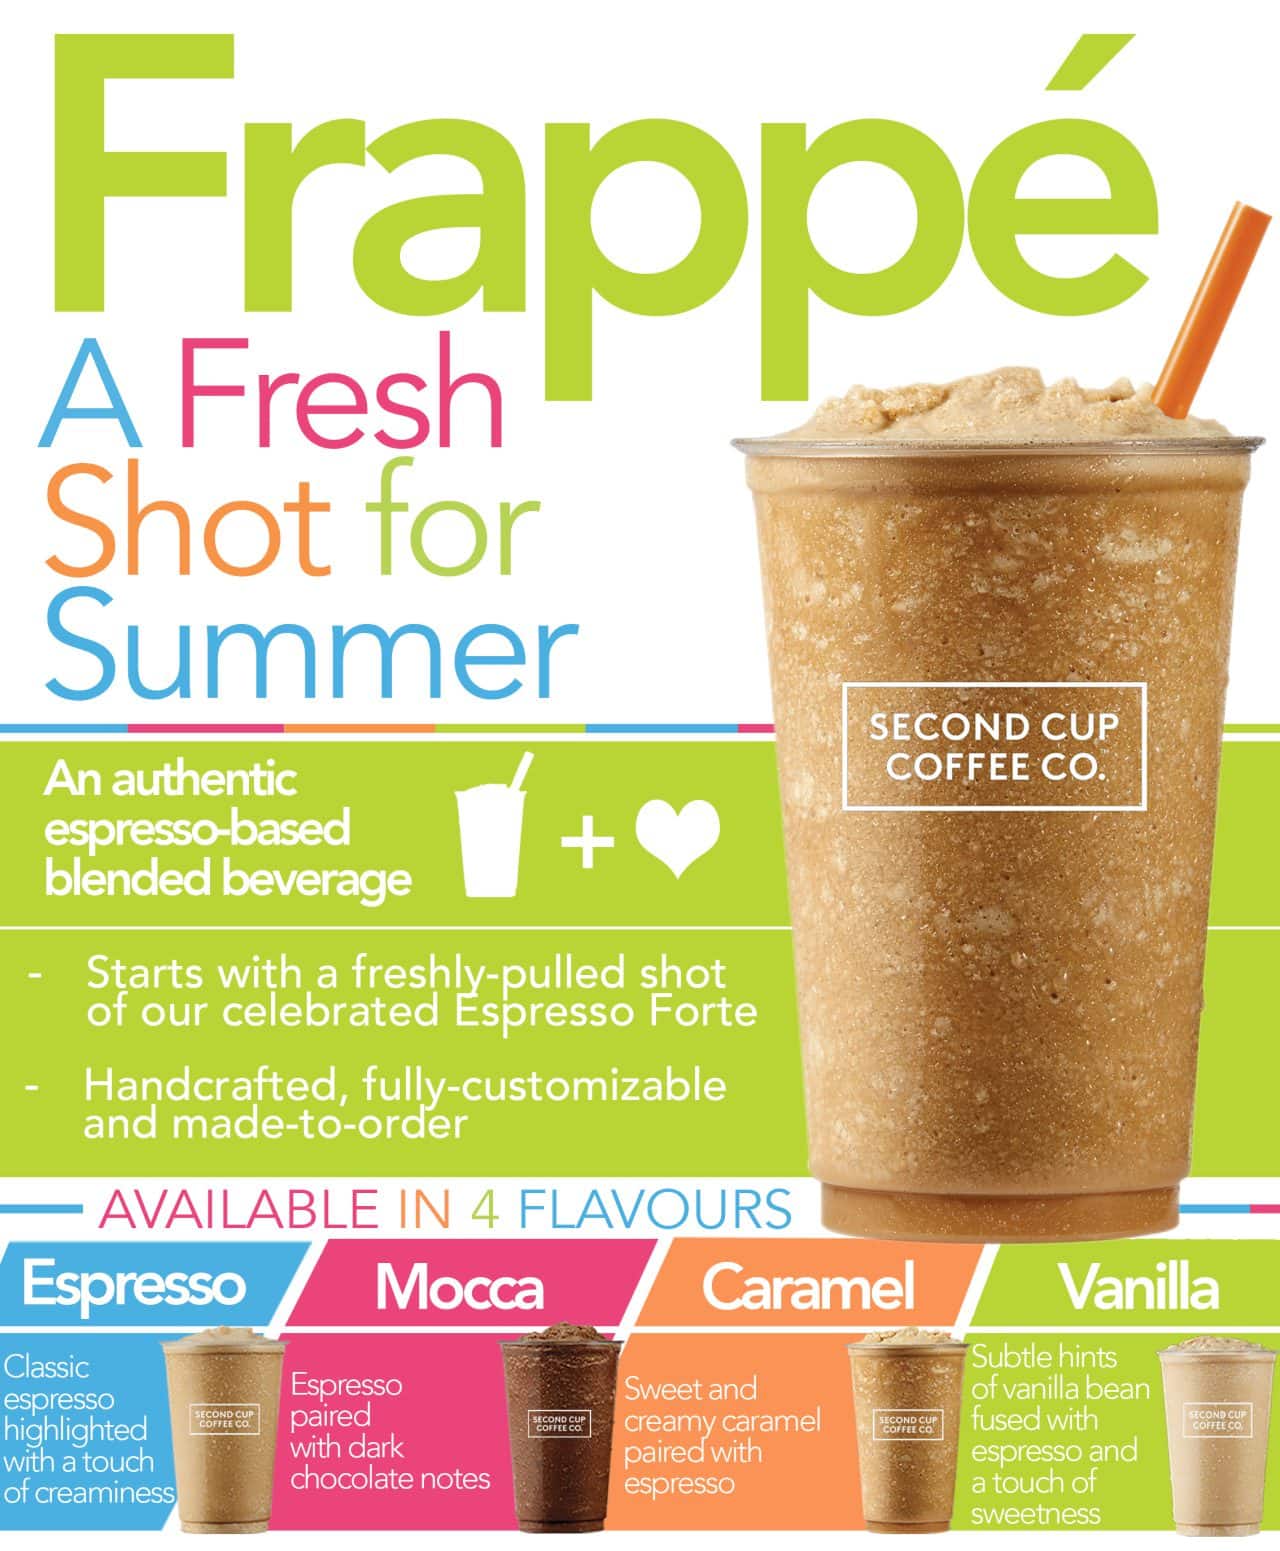 Second Cup Frappe - Infographic May 8, 2015